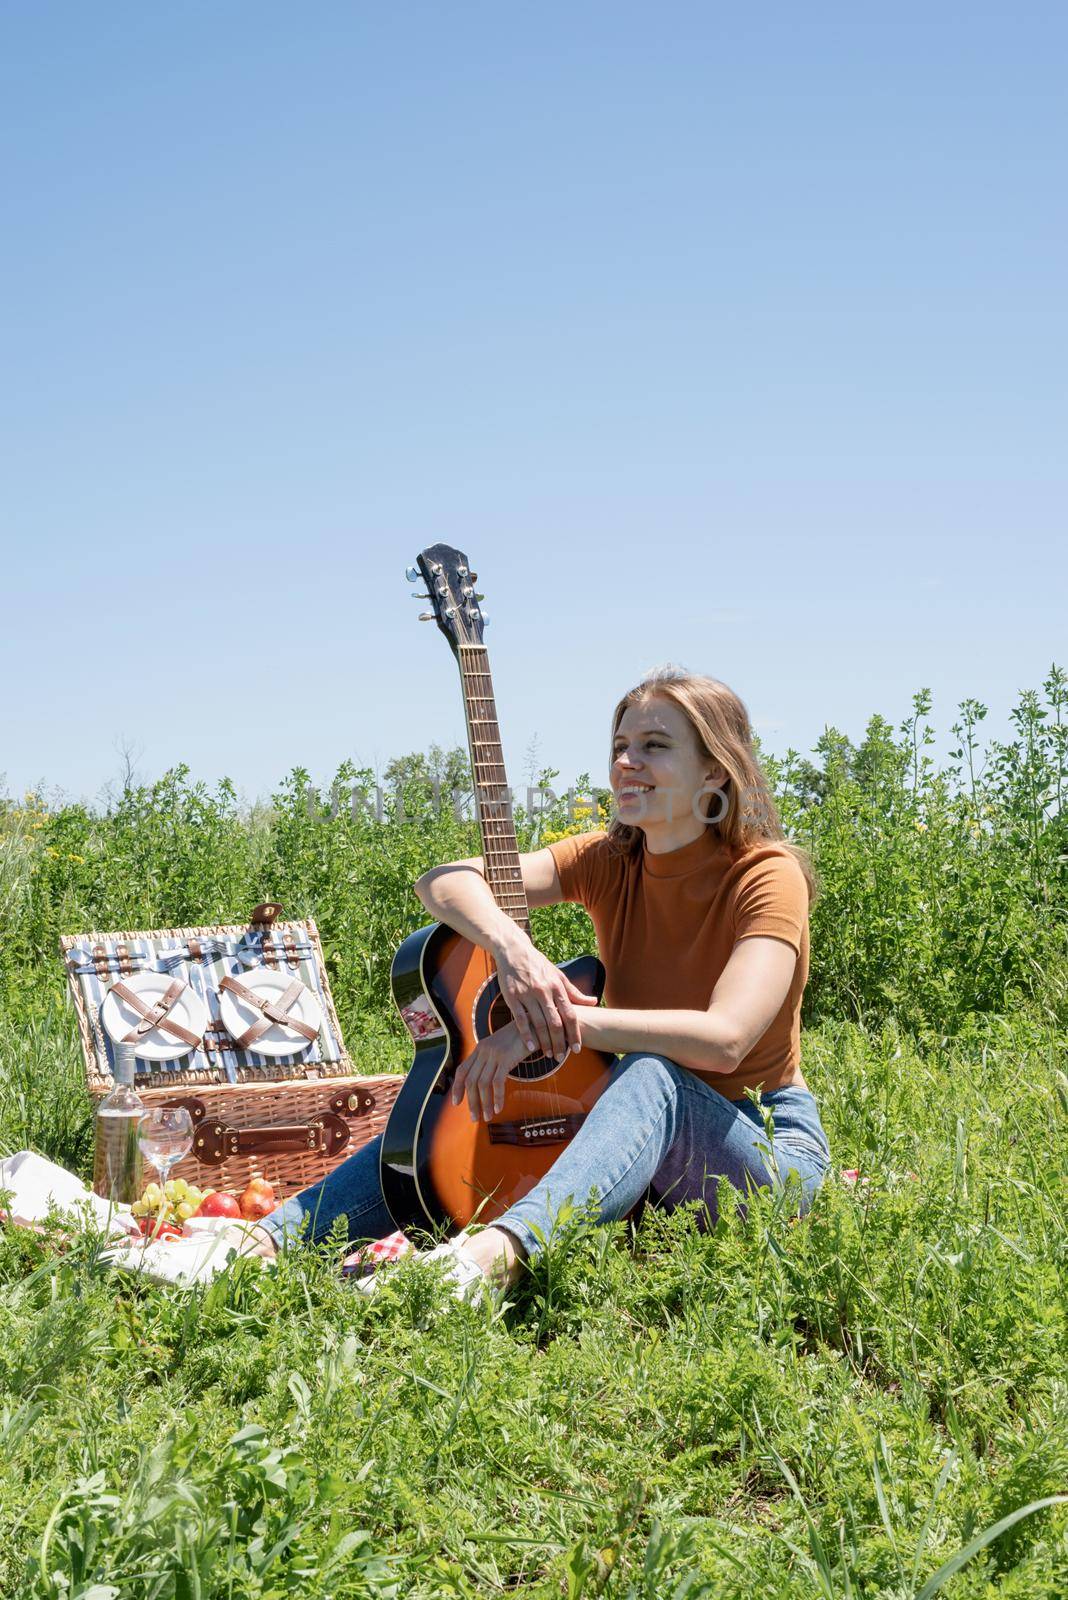 millennial woman in summer clothes and sunglasses playing guitar on a picnic. Happy woman holding her guitar peacefully sitting on grass